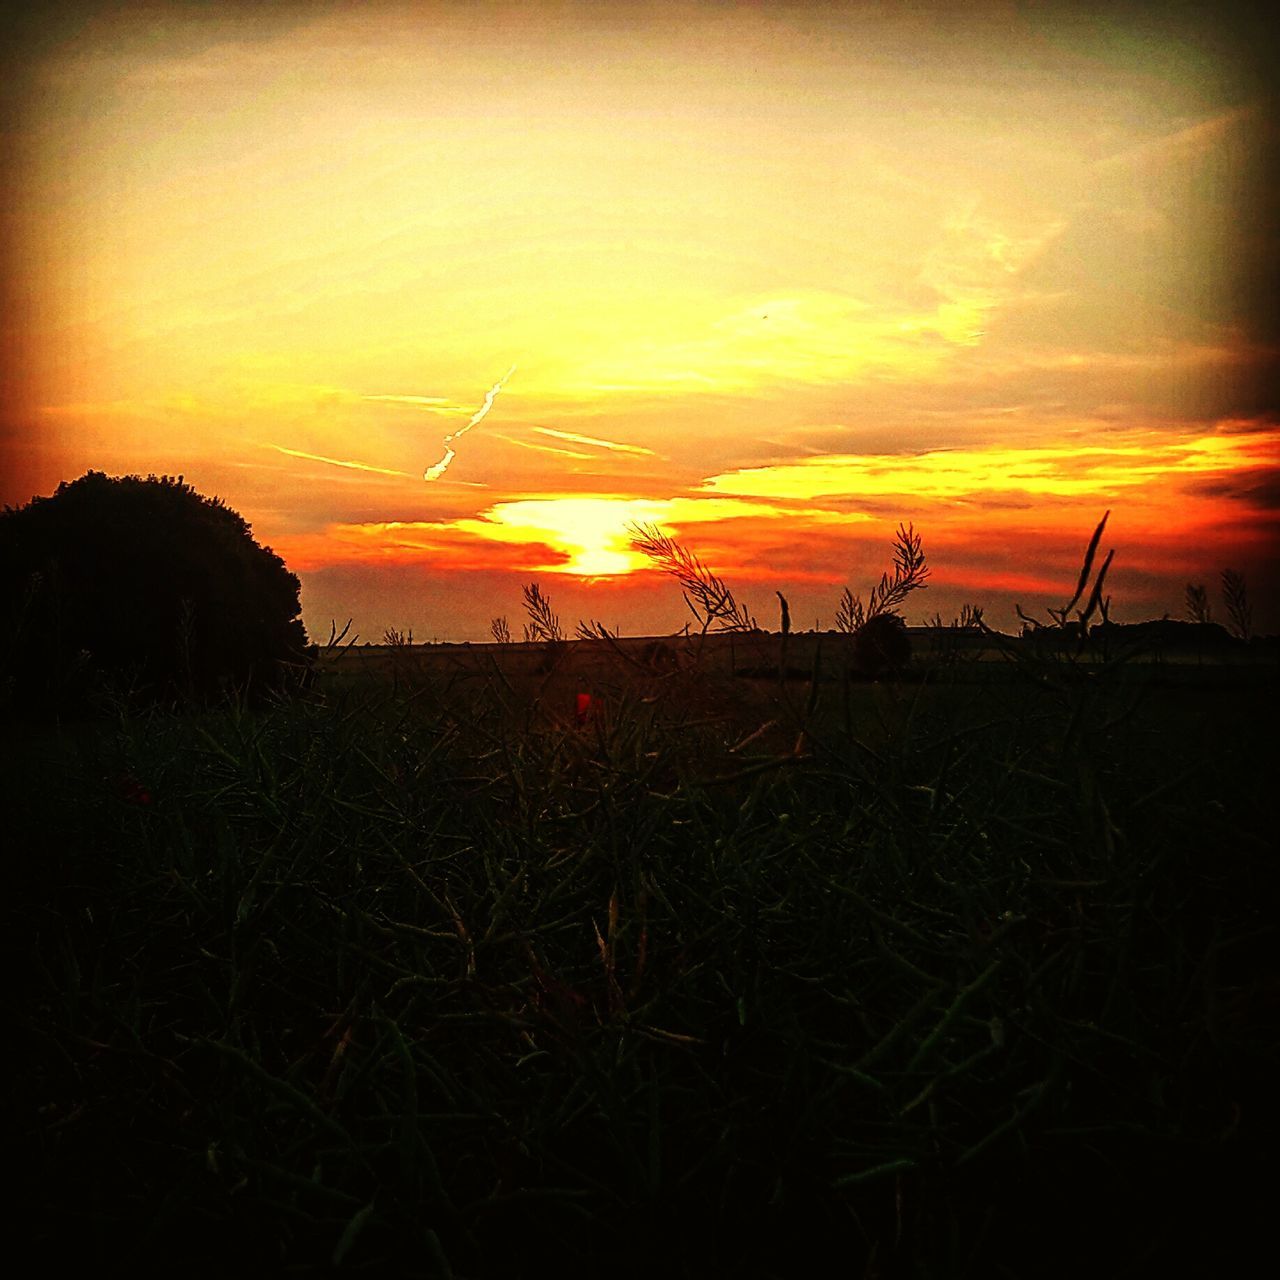 sunset, sun, tranquil scene, orange color, scenics, tranquility, beauty in nature, sky, field, landscape, silhouette, nature, idyllic, plant, sunlight, grass, growth, cloud - sky, outdoors, rural scene